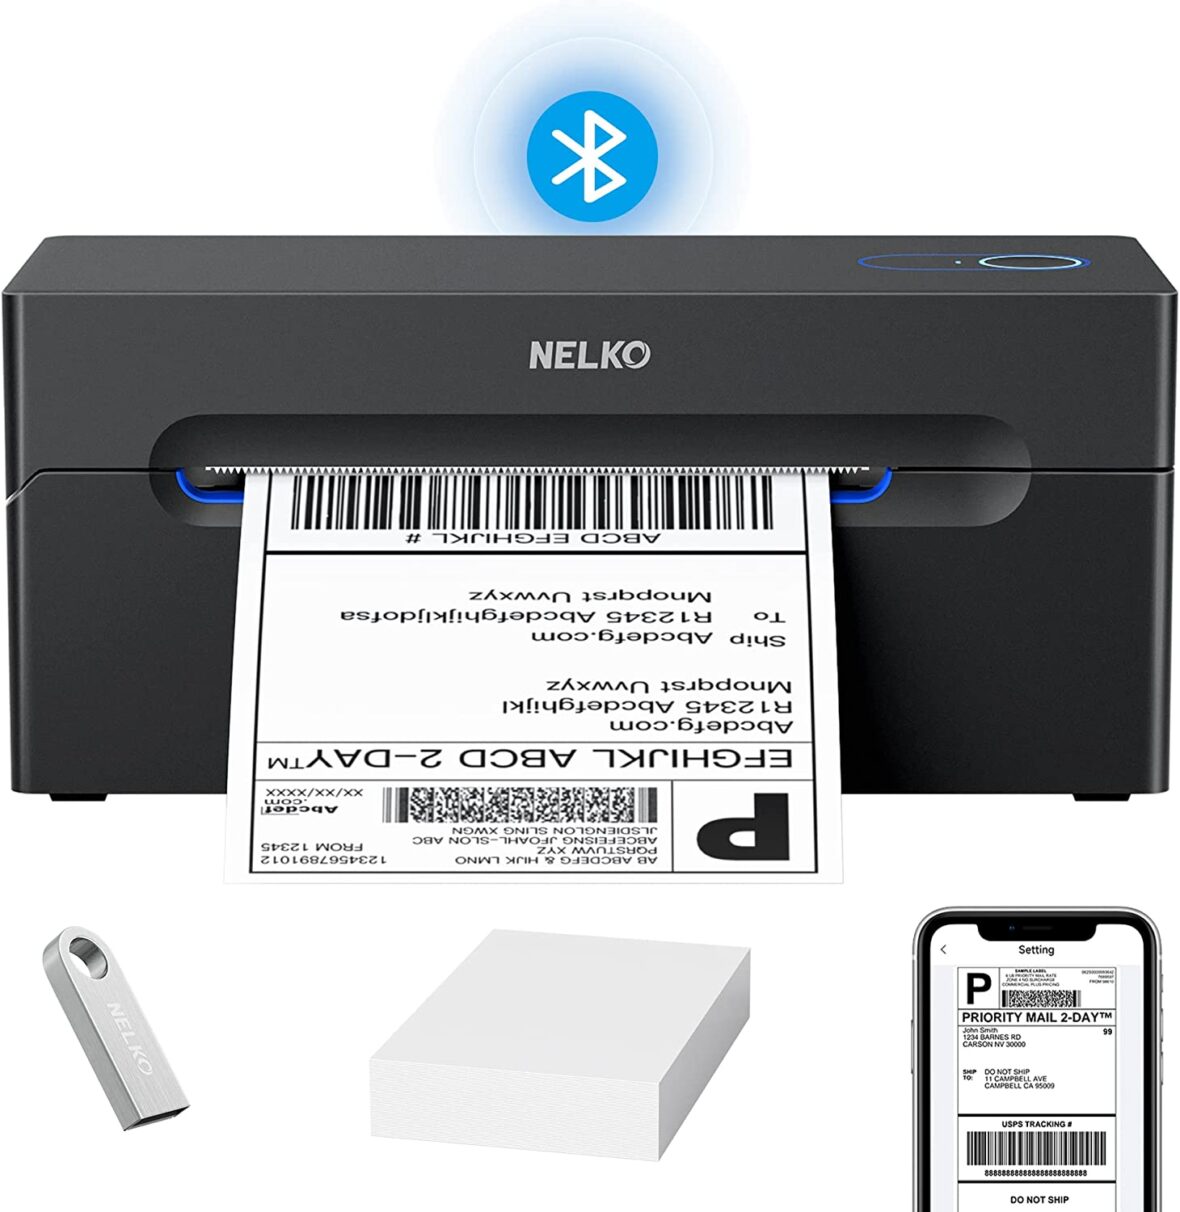 Amazon's best printers for home use: Nelko Bluetooth Thermal Shipping Label Printer